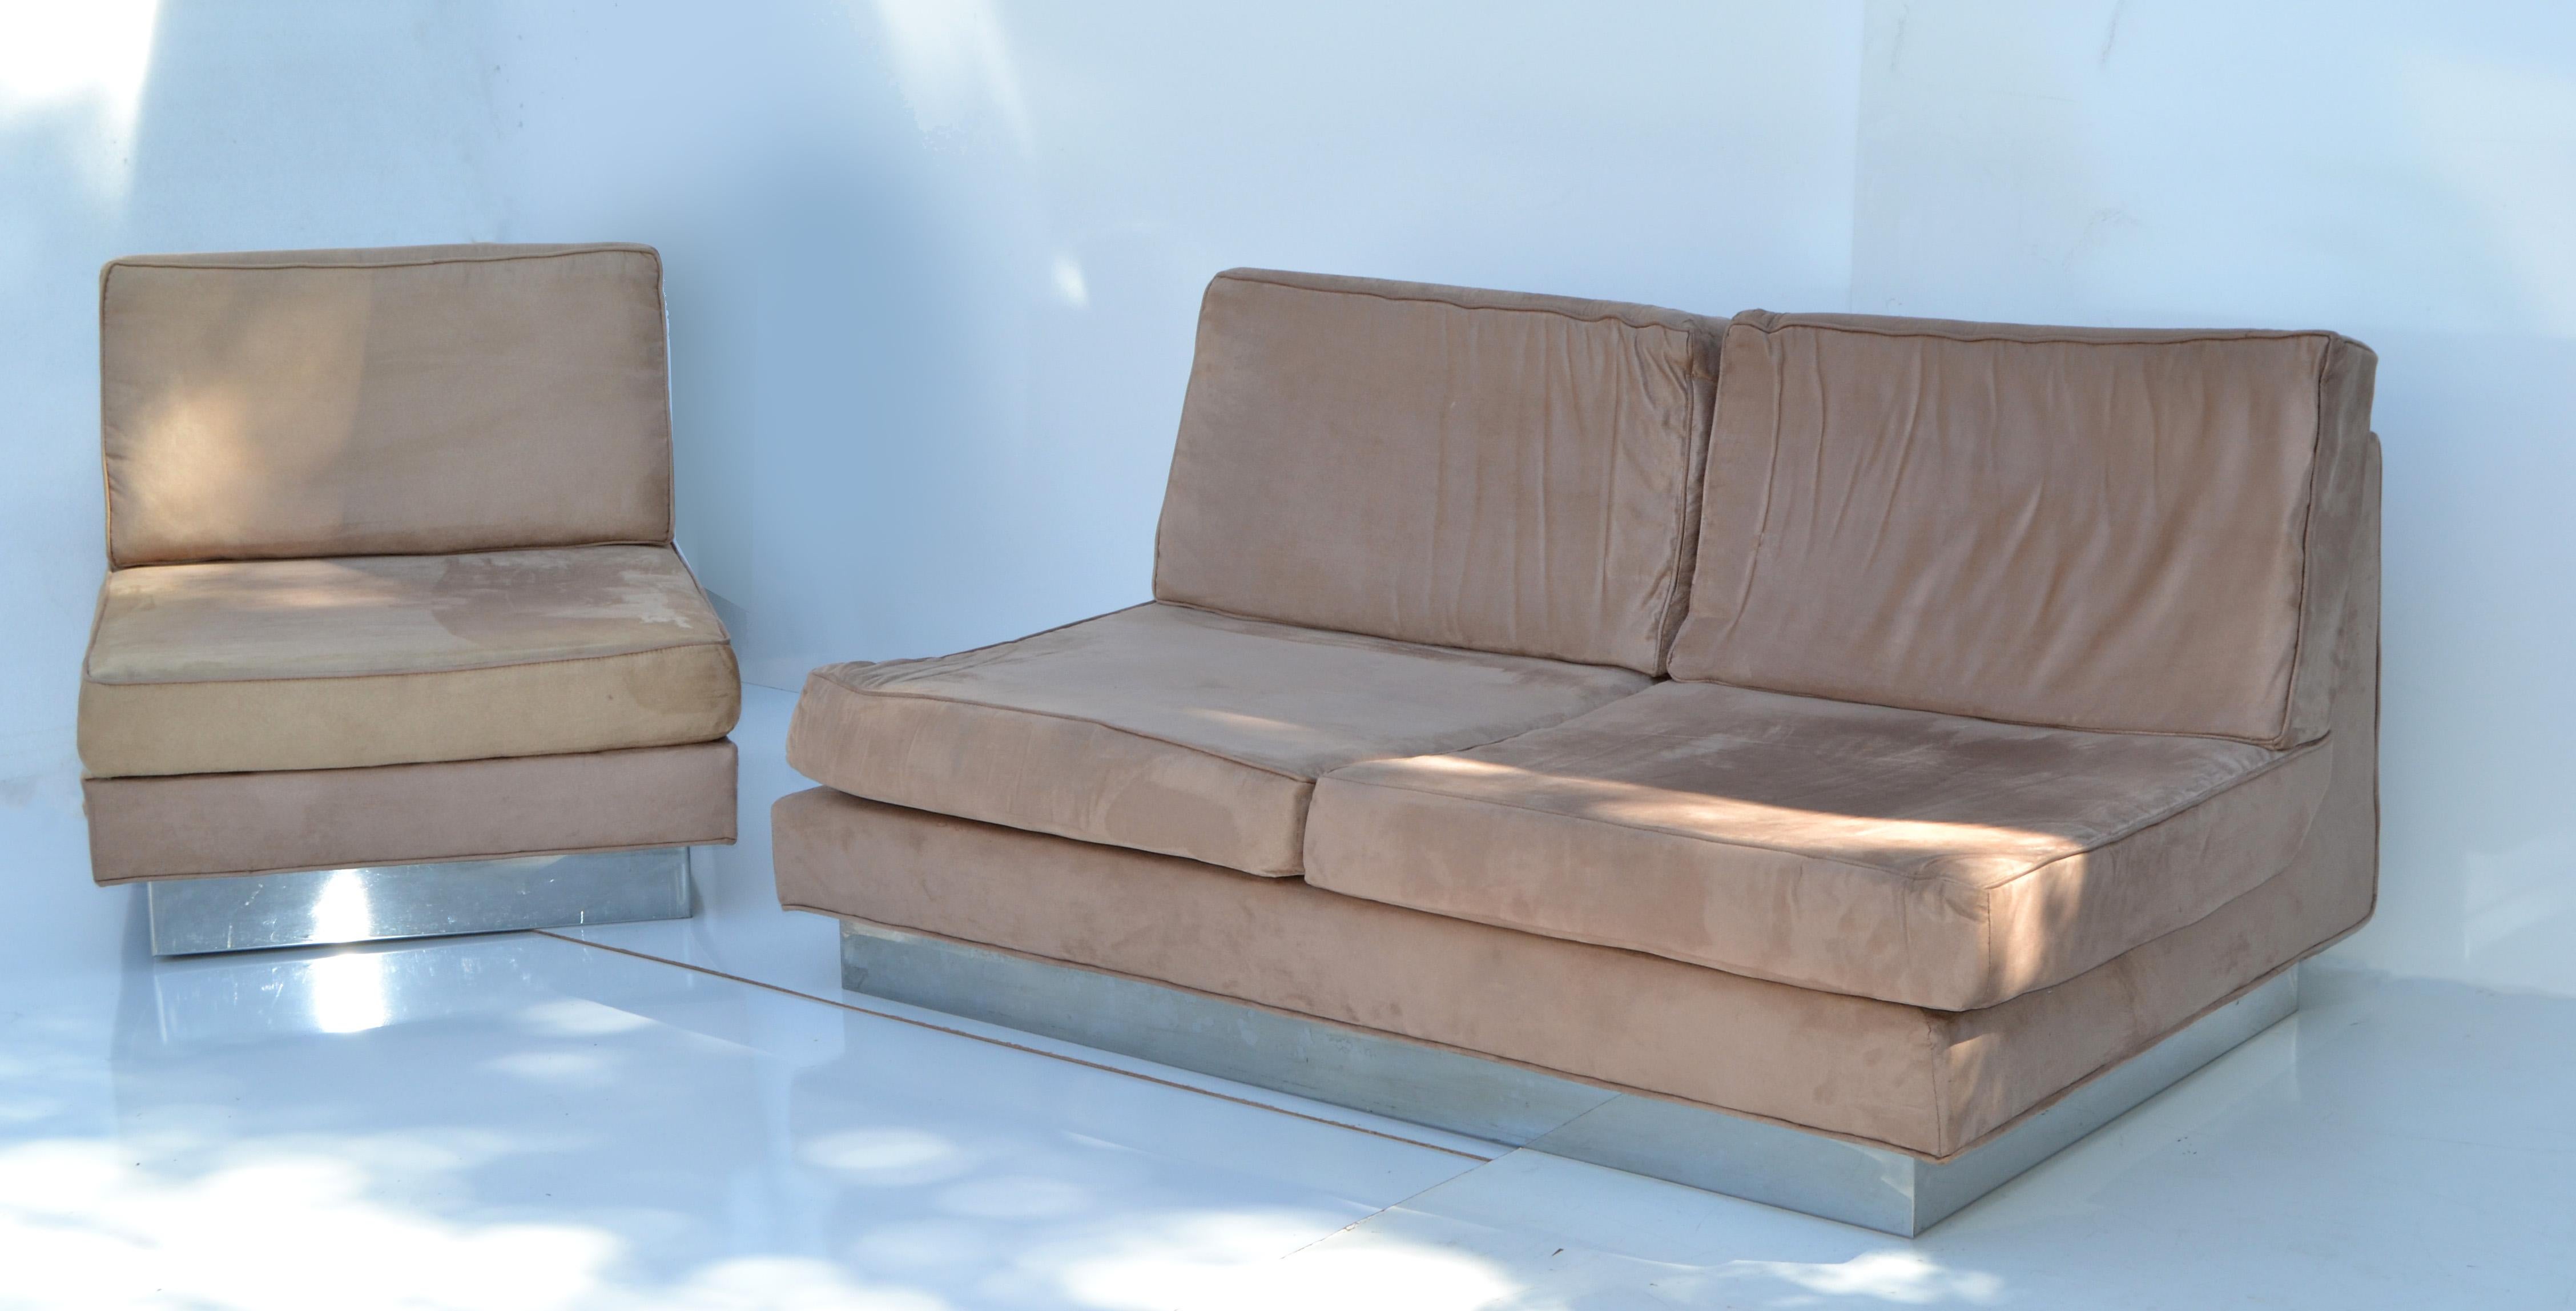 Jacques Charpentier Loveseat & Lounge Chair in Beige Ultrasuede 1970 France In Good Condition For Sale In Miami, FL